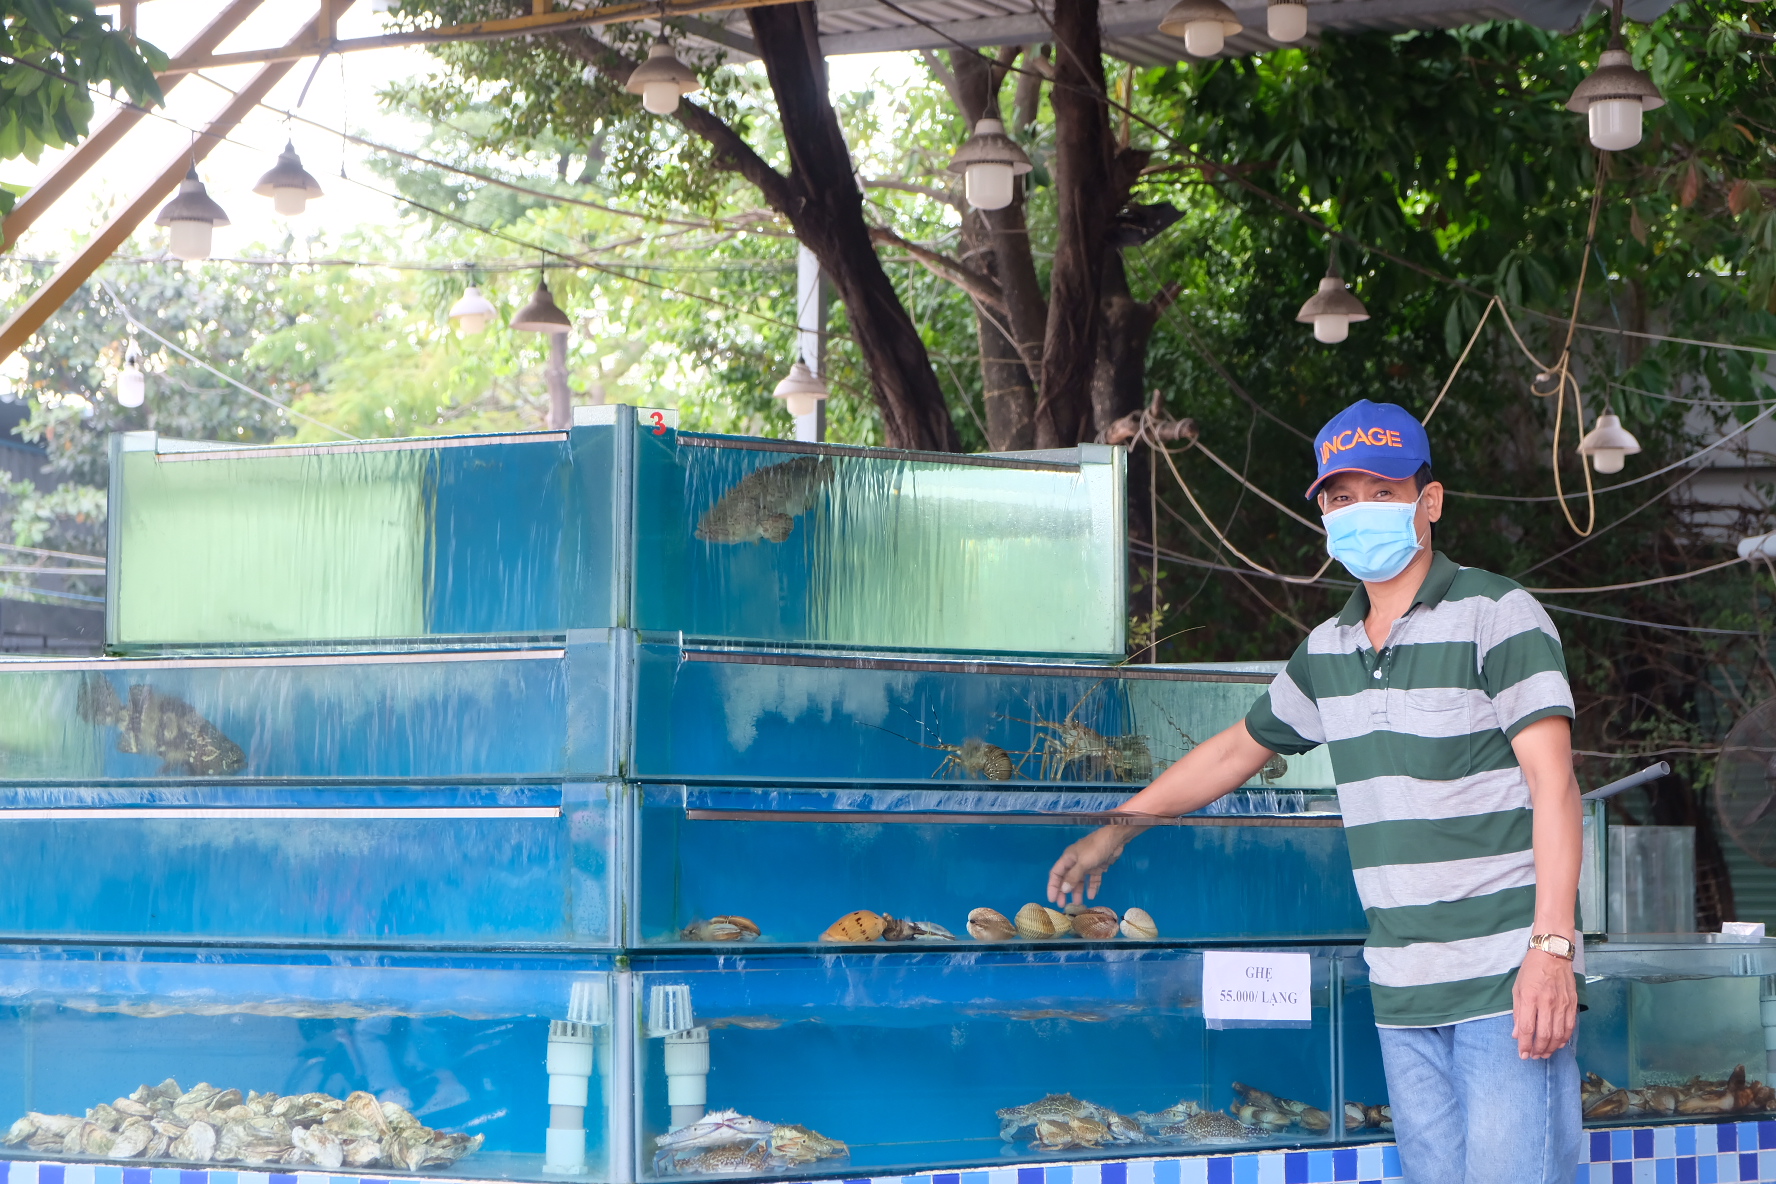 Sang, staffer at a food stall in Thu Duc City, Ho Chi Minh City, is seen near a seafood tank operating at low capacity, November 2021. Photo: Bong Mai / Tuoi Tre